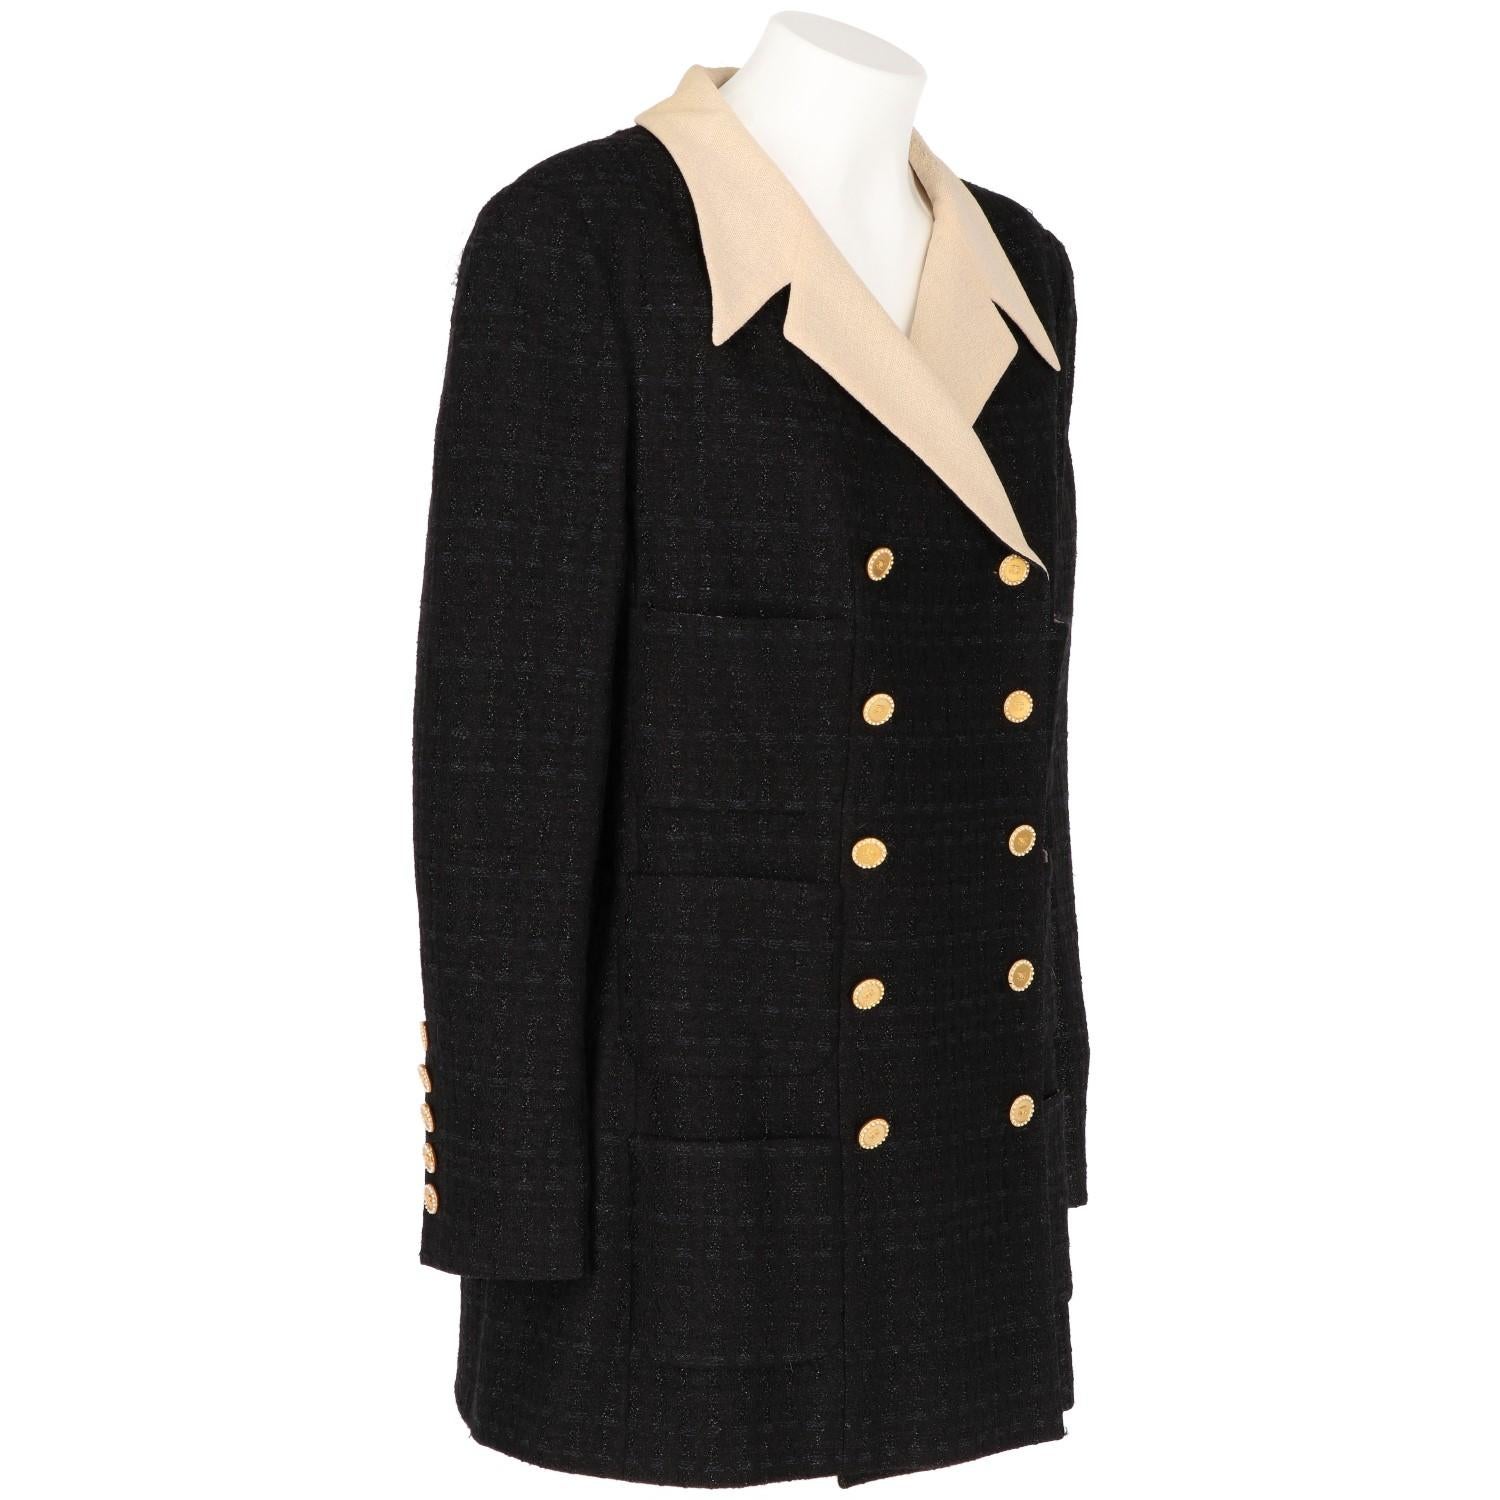 Marvelous Chanel double-breasted jacket in black fabric with shiny lurex inserts. It features an ivory white contrasting collar with sharp lapels, double jewel buttons row on the front, buttoned cuffs, 3 pockets on both jacket's sides. Lightly